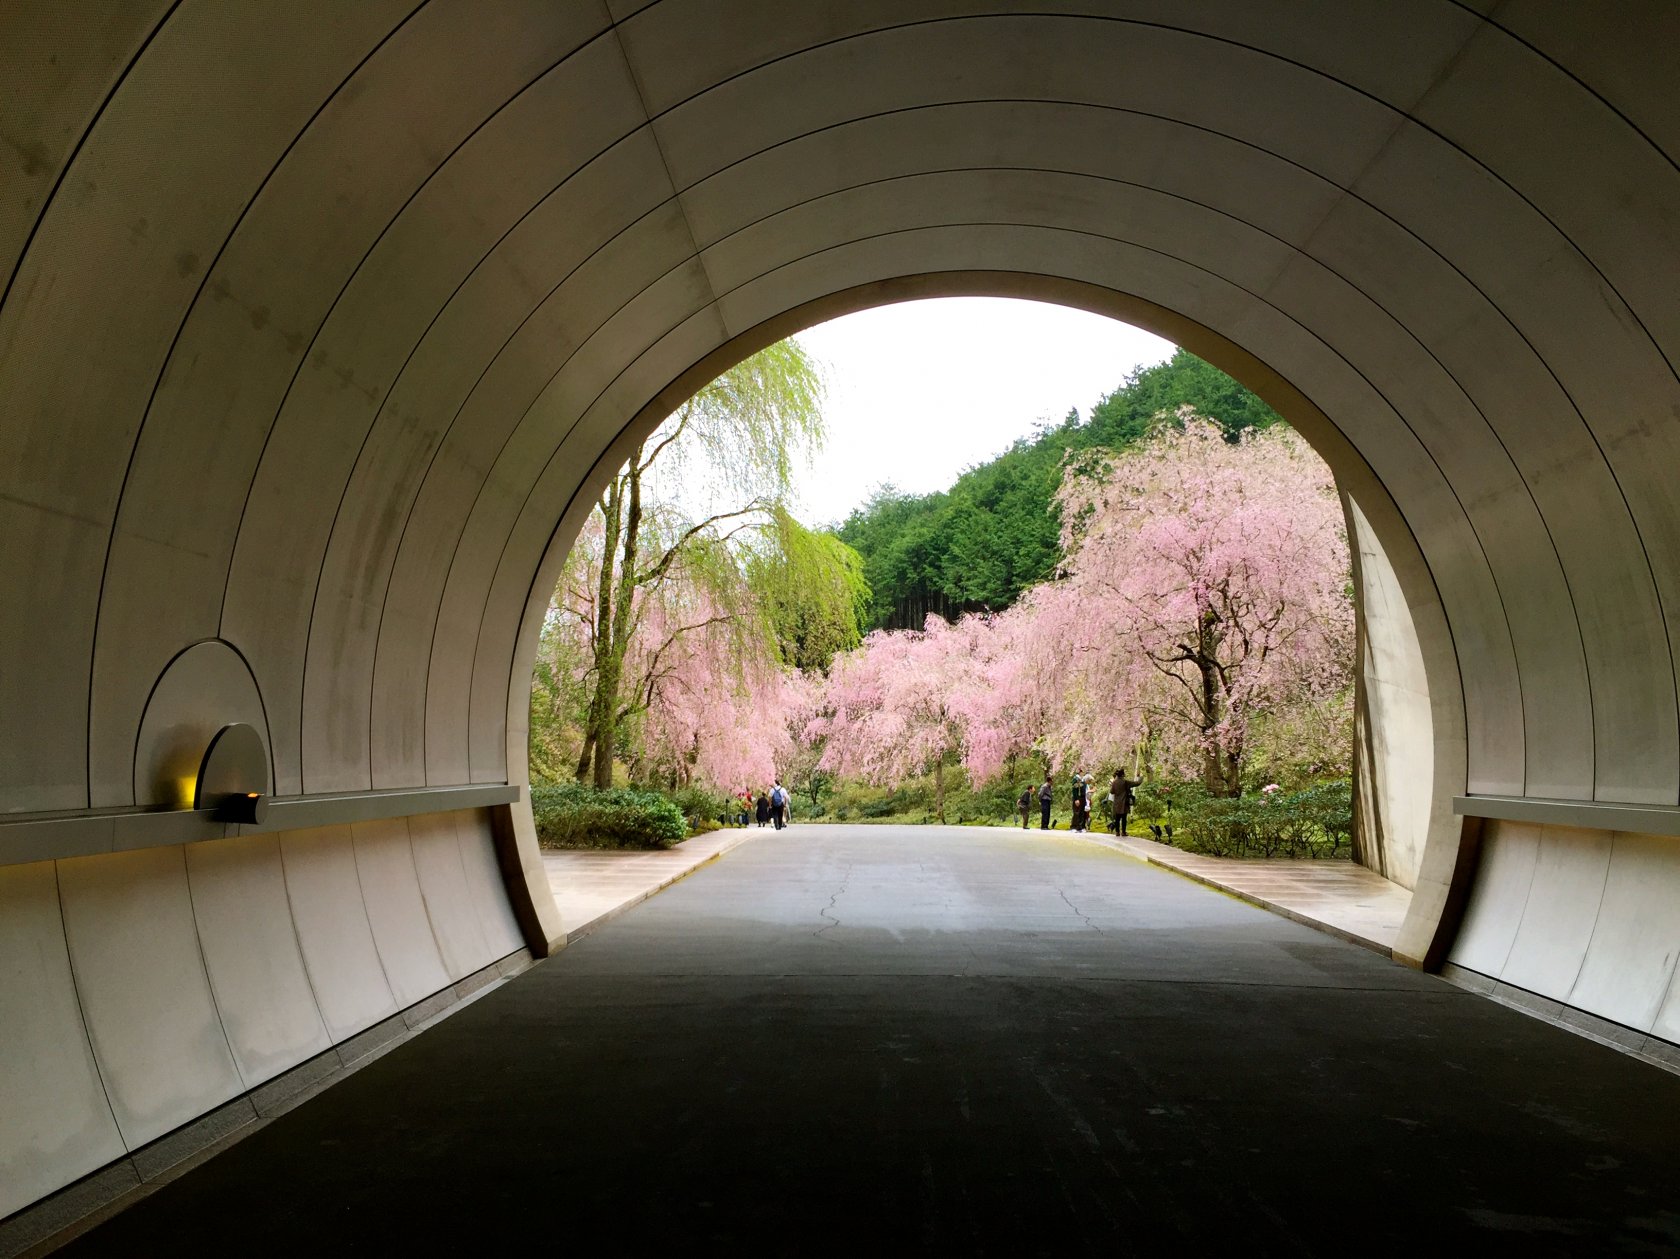 Miho Museum: All You Need to Know About this I.M. Pei Masterpiece